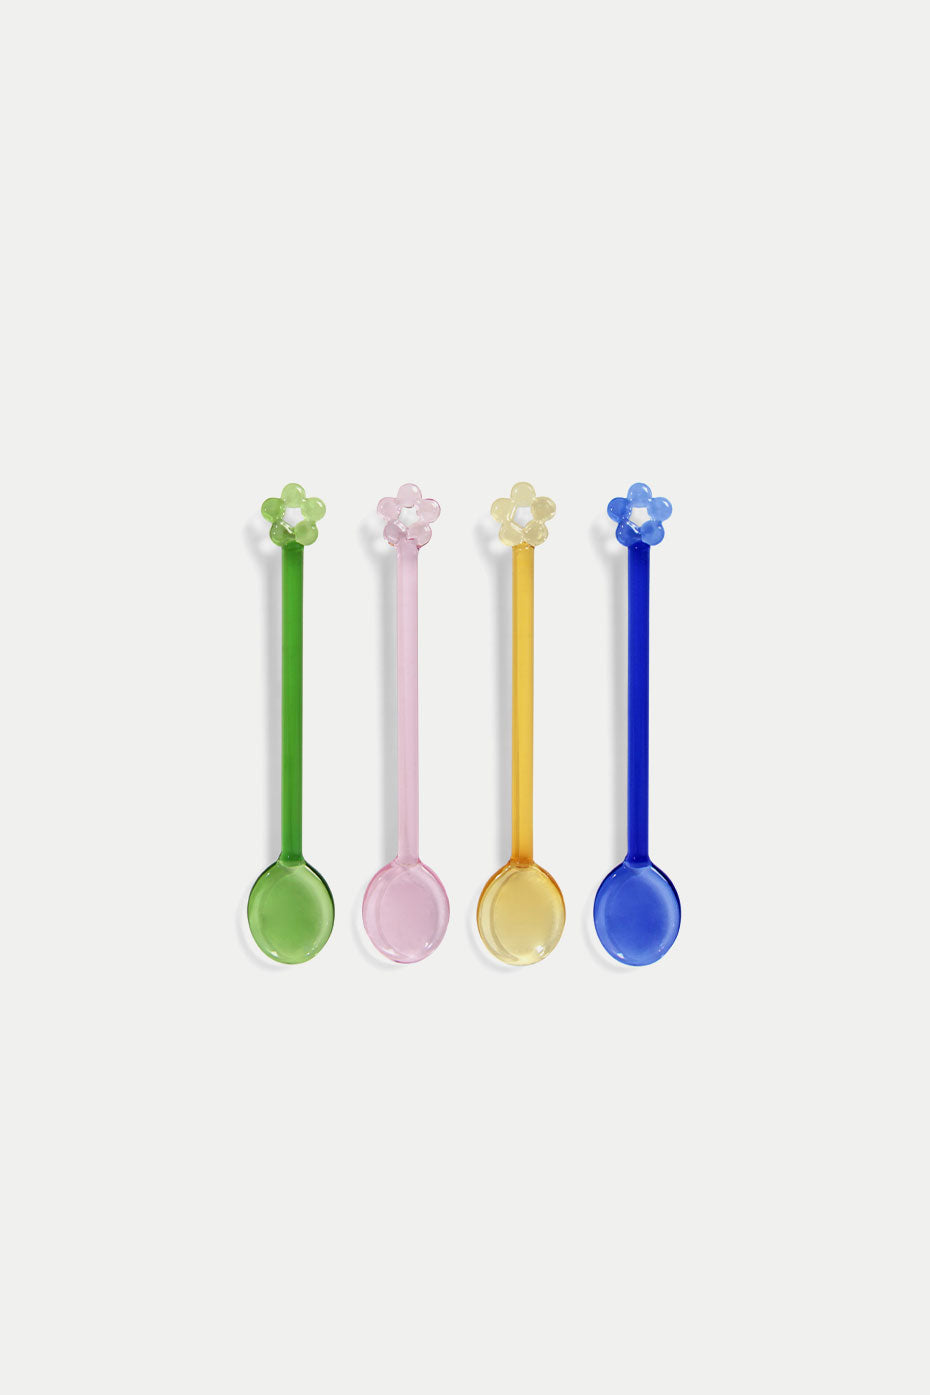 &klevering Daisy Spoon - Set Of 4